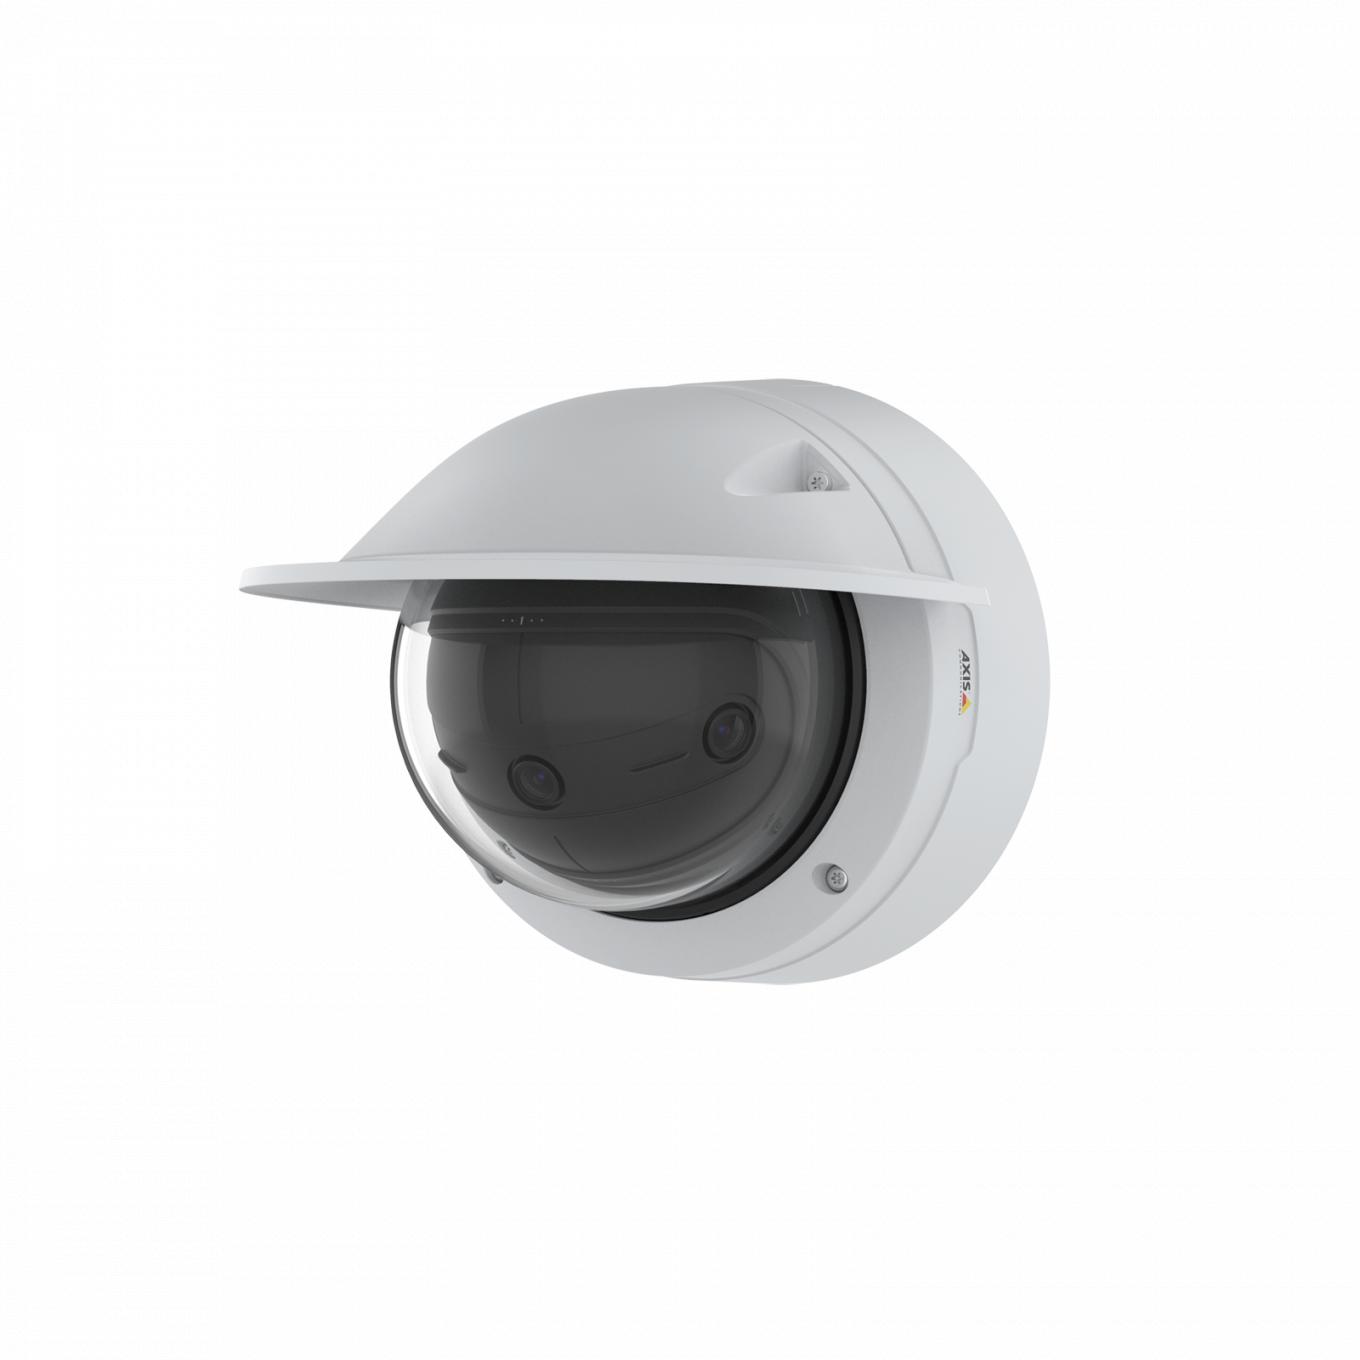 AXIS P3818-PVE Panoramic Camera with weathershield